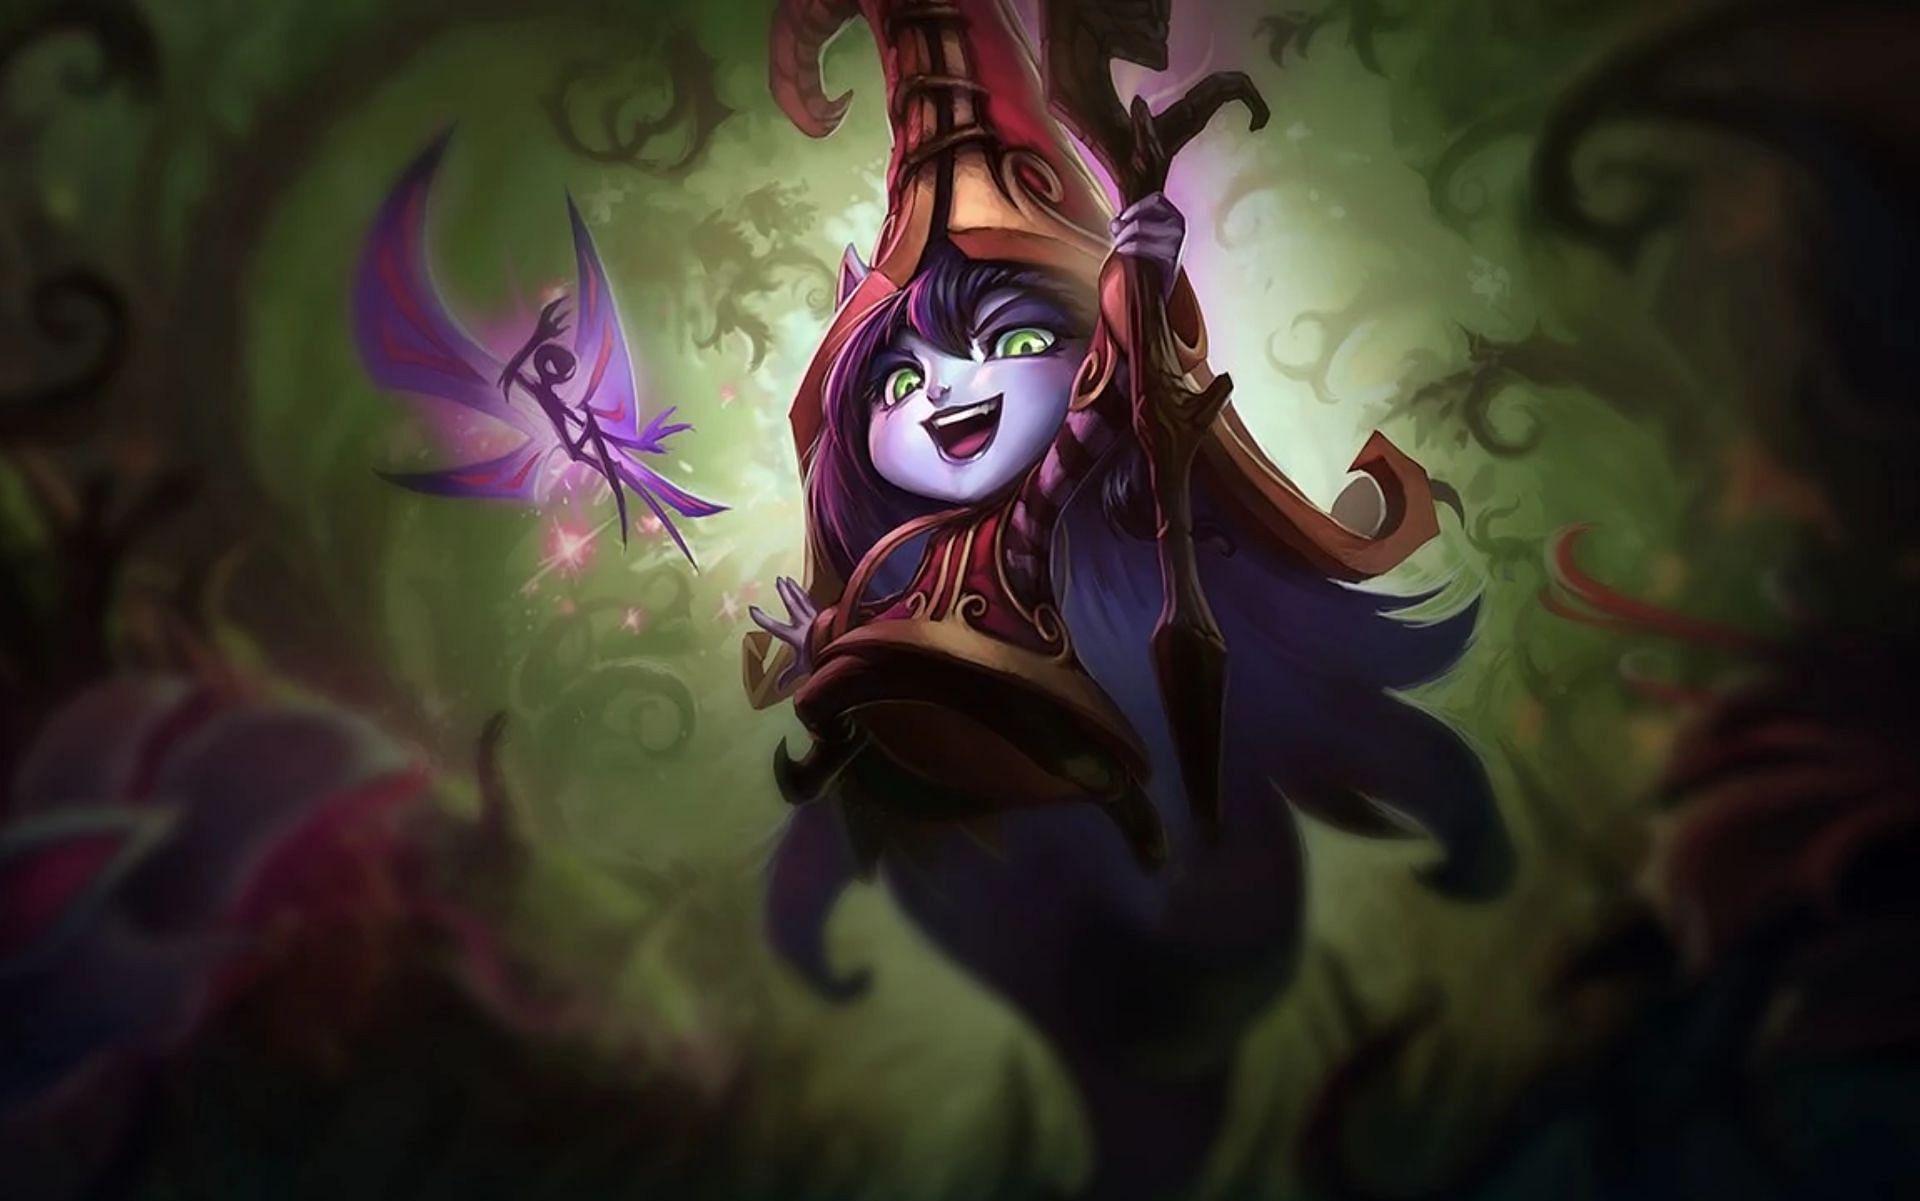 Lulu receives major nerfs to her W ability ahead of Worlds 2022 (Image via Riot Games)